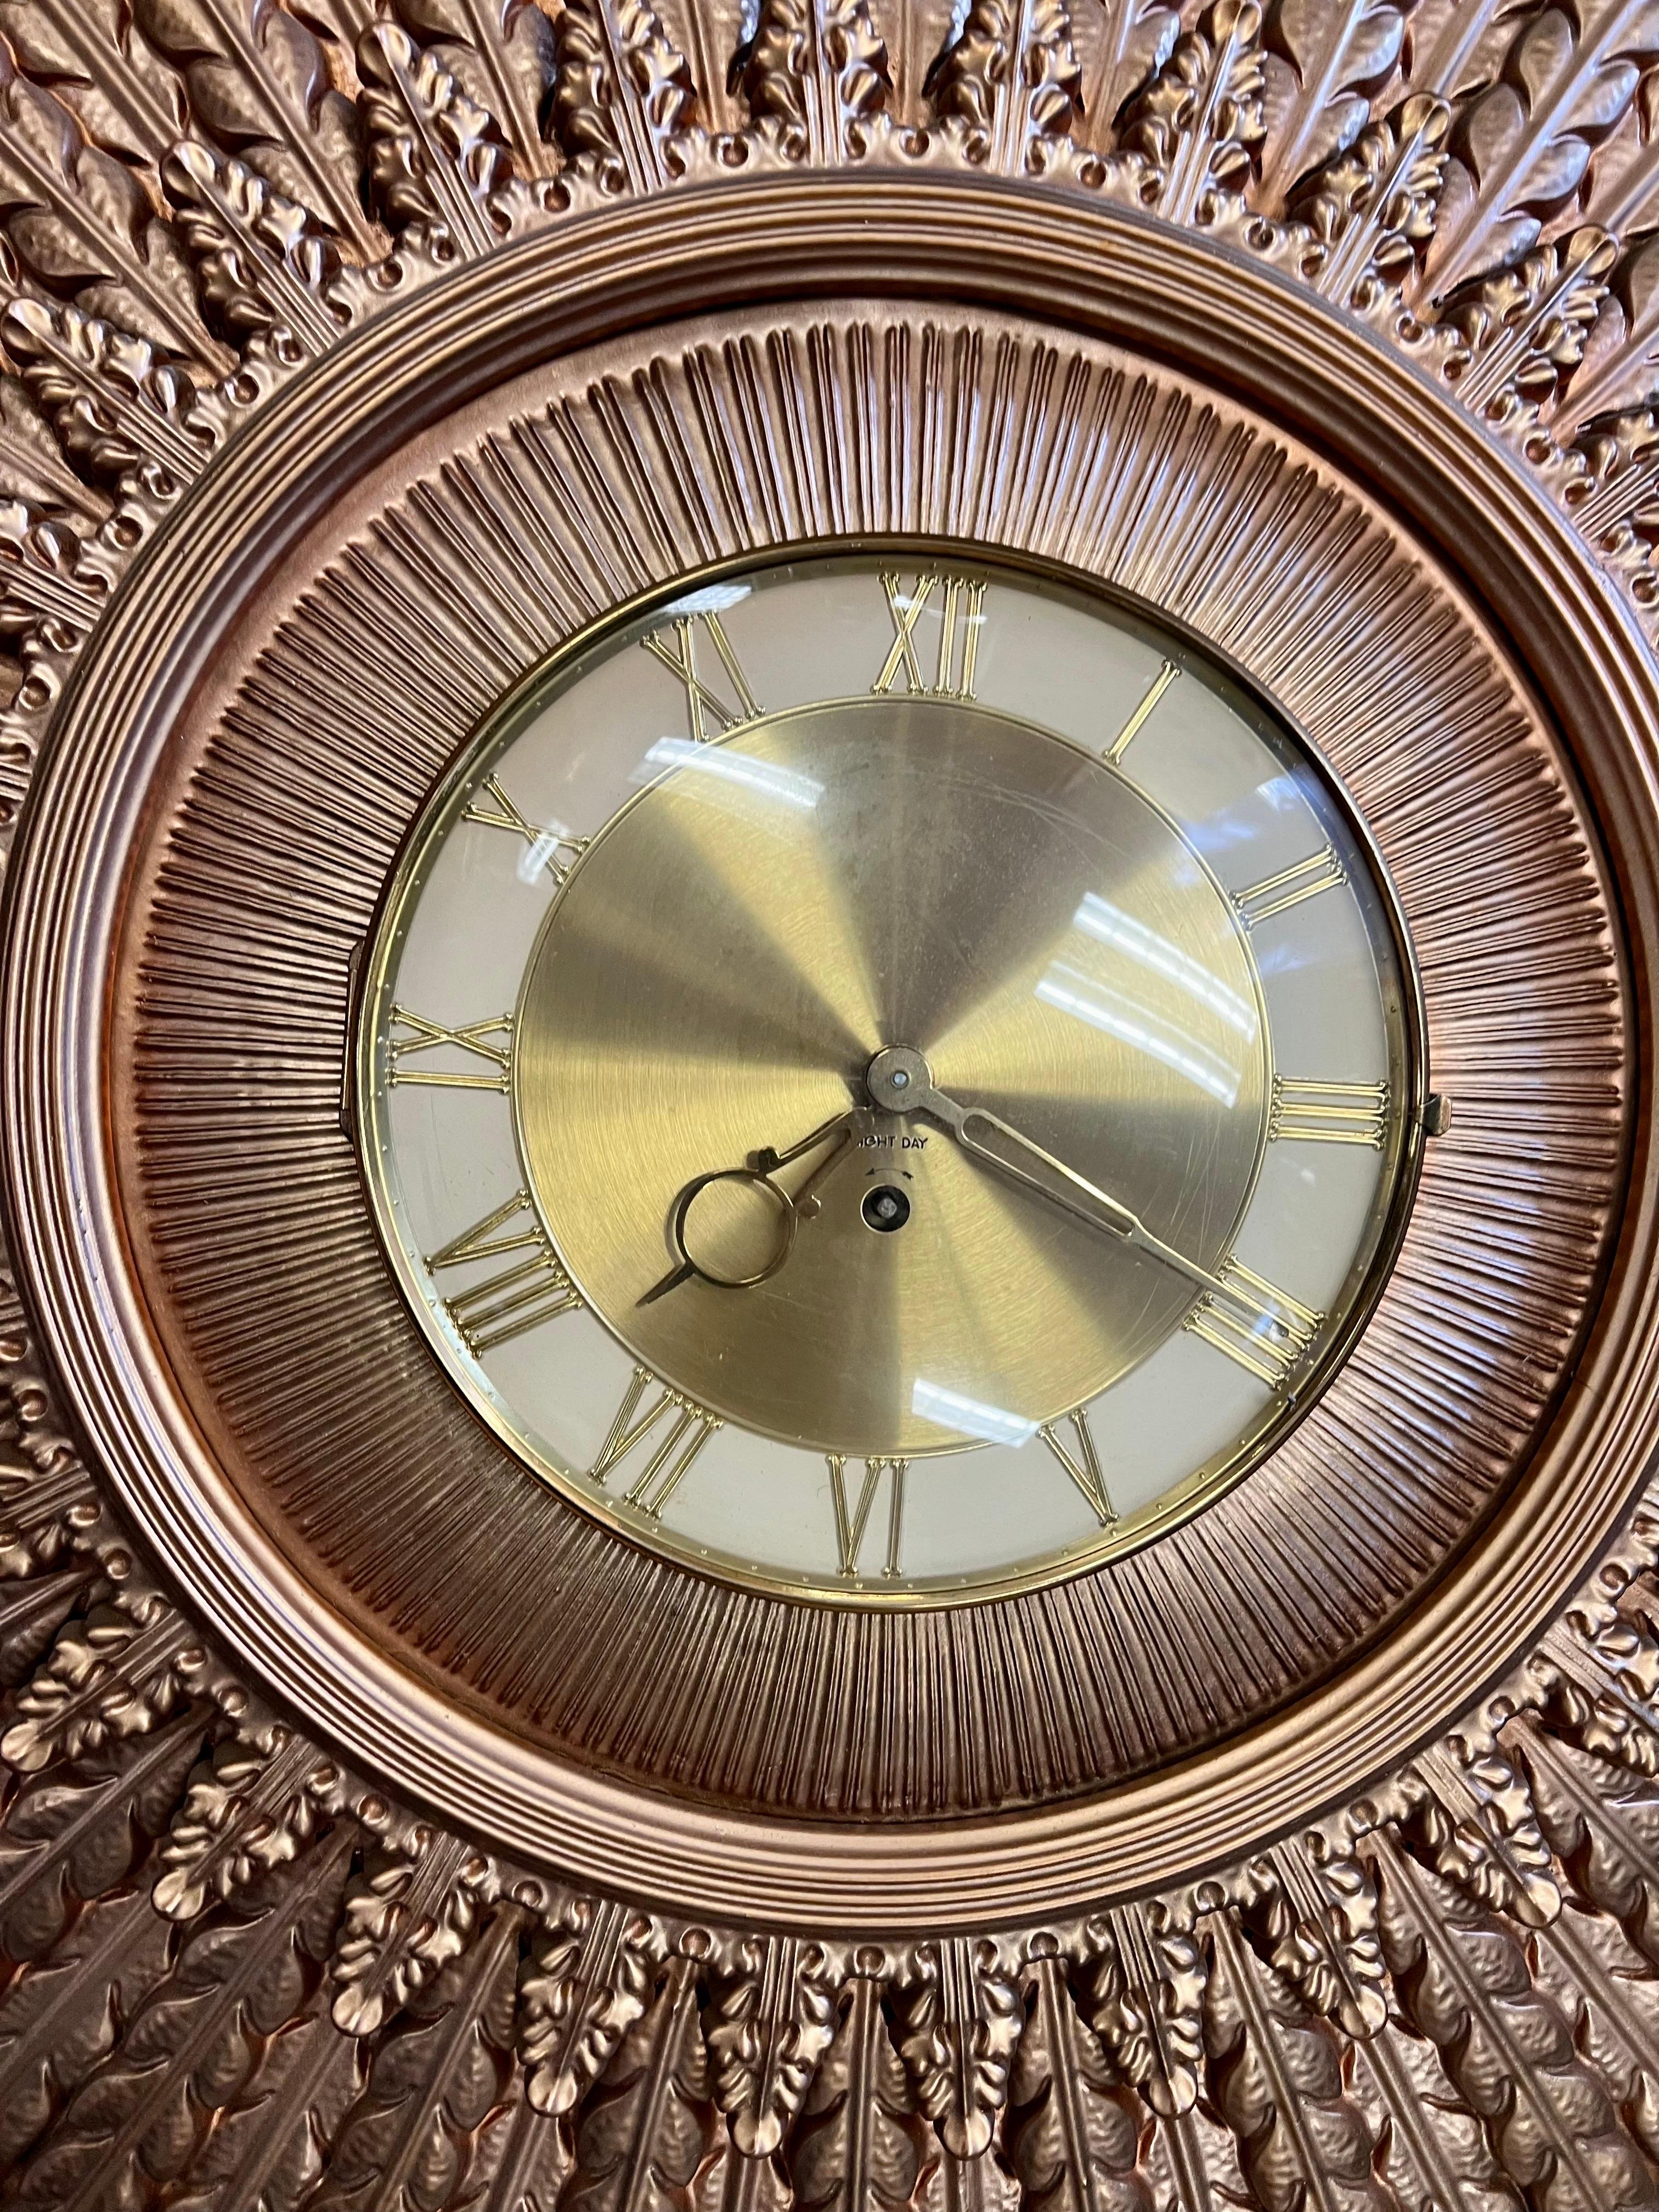 Stunning iconic mid century eight day gold starburst clock with key.  Clocj face has window that opens.